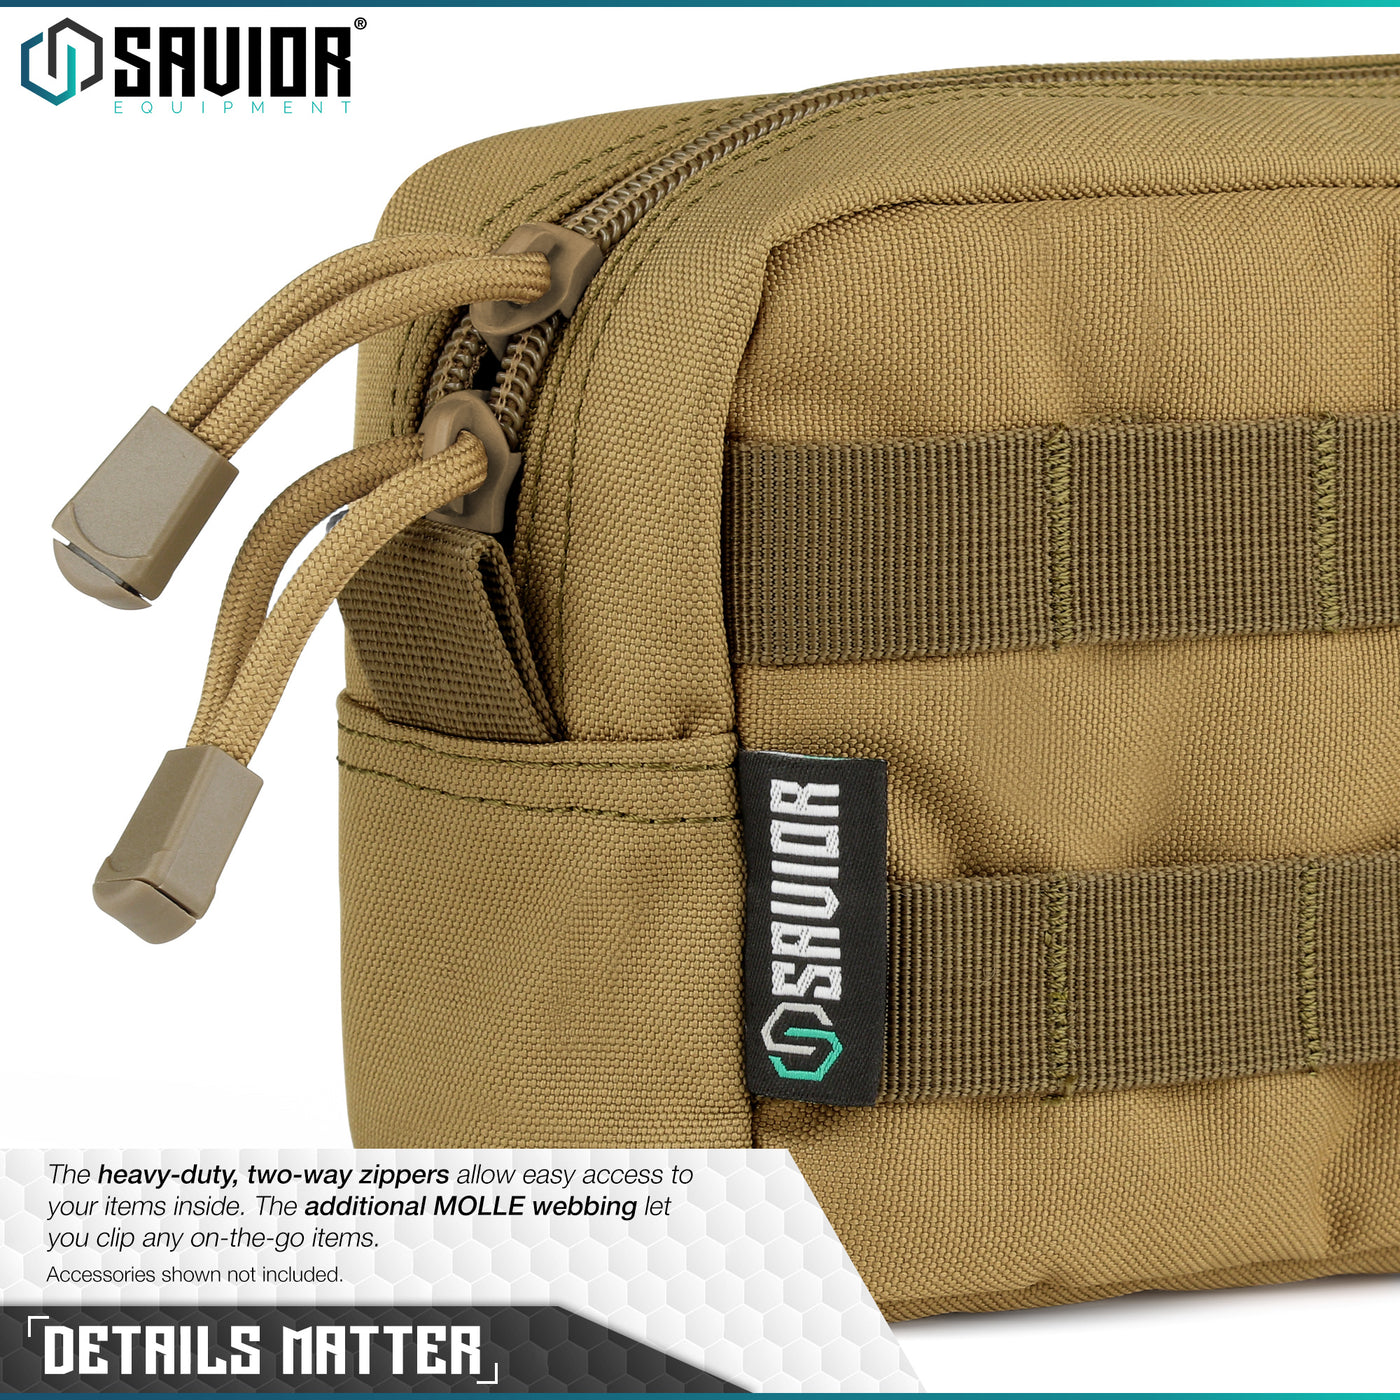 Details Matter - The heavy-duty, two-way zippers are designed to give you easy access to items inside. The additional MOLLE webbing let you clip any on-the-go items. Accessories shown not included.